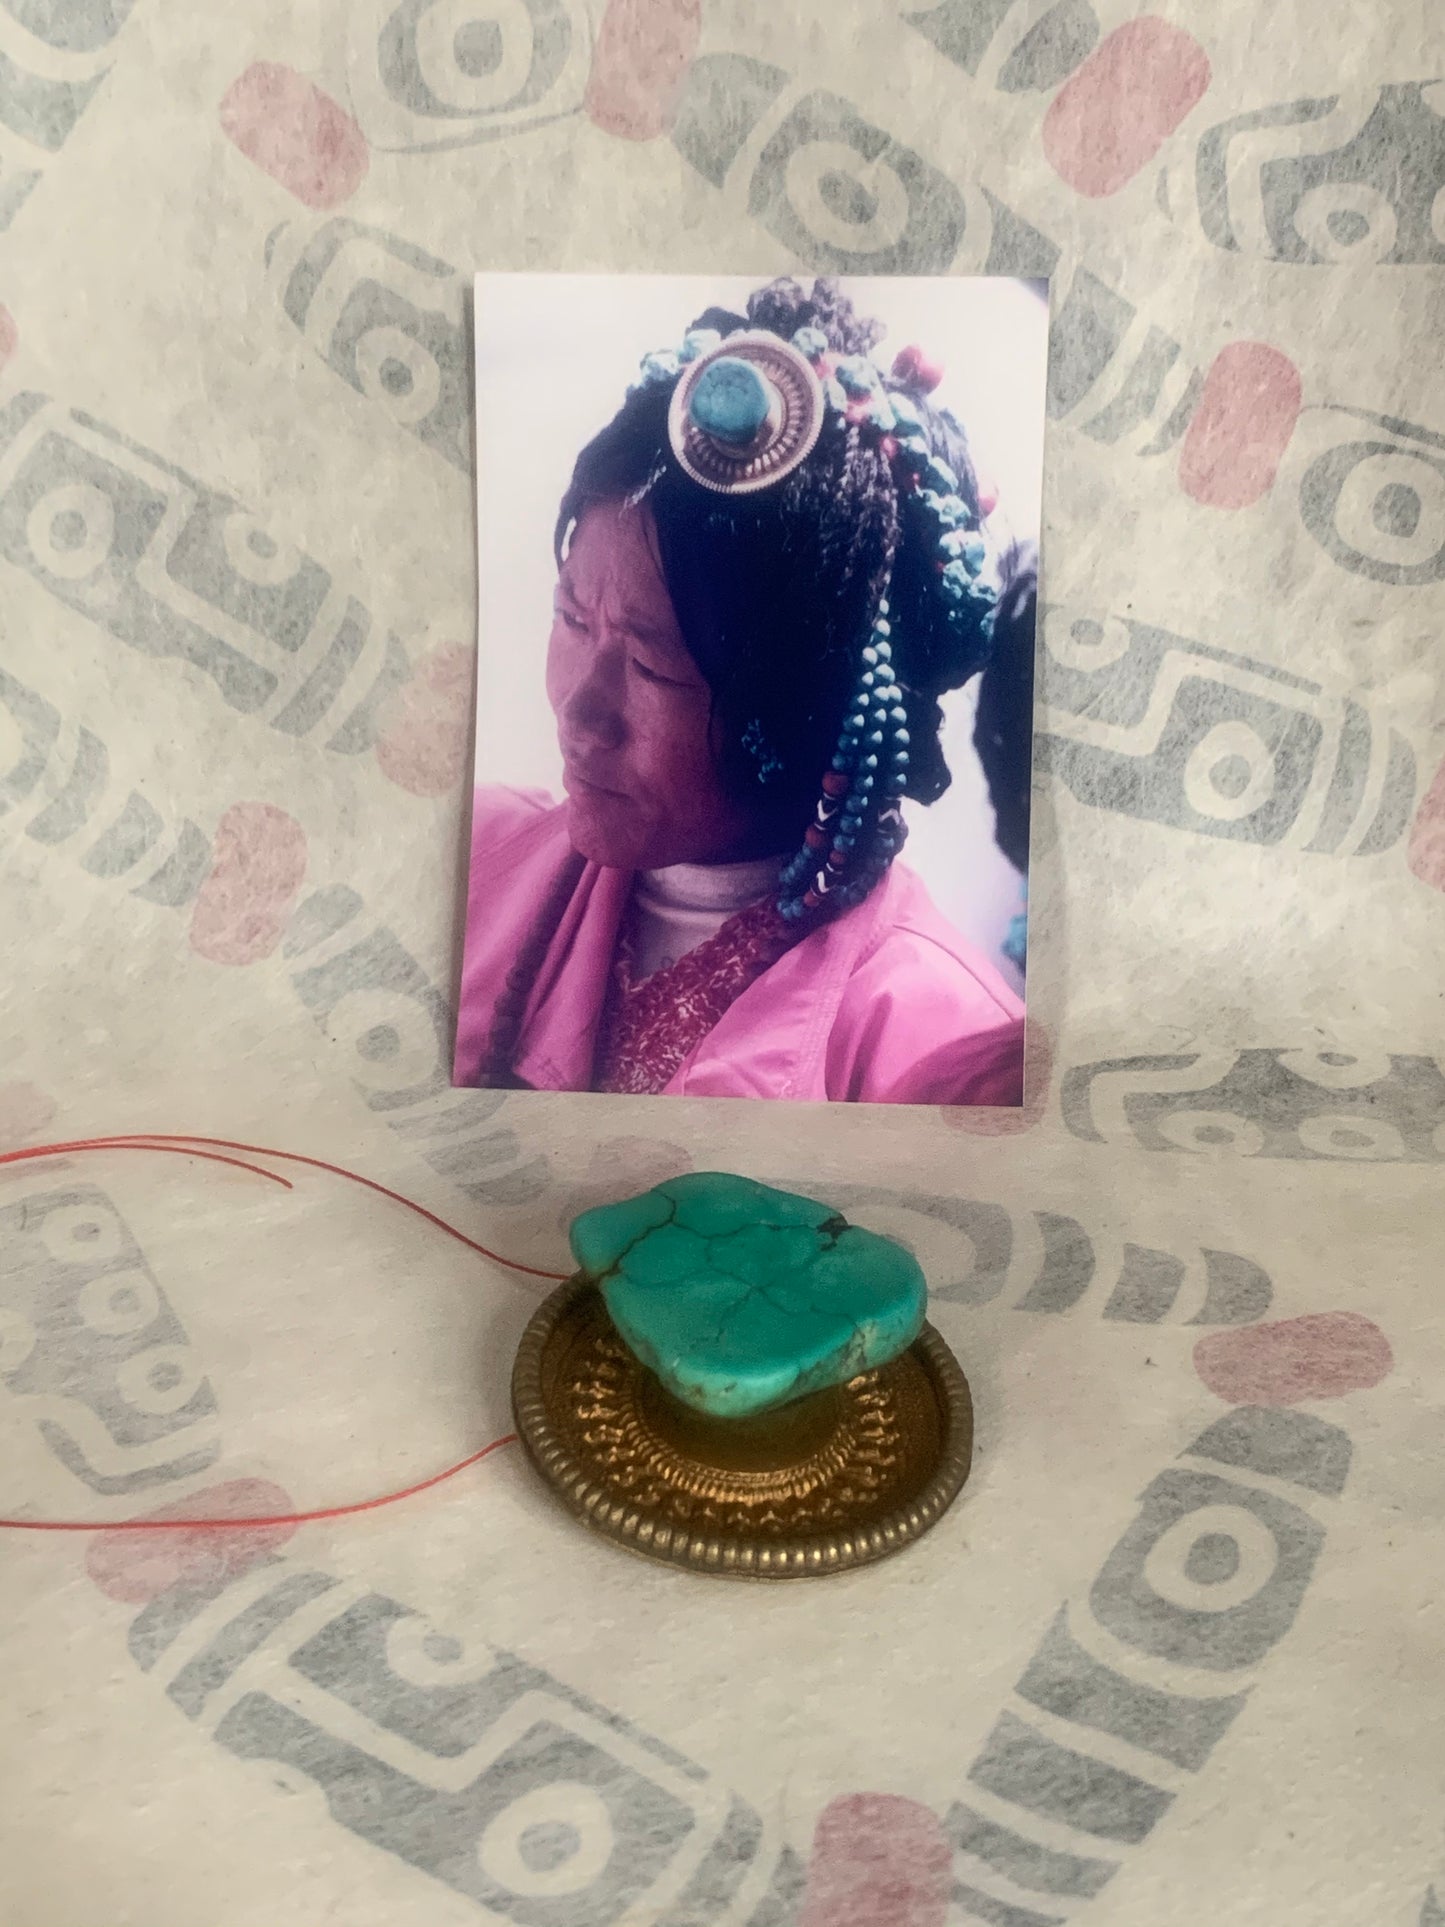 Turquoise hair ornament